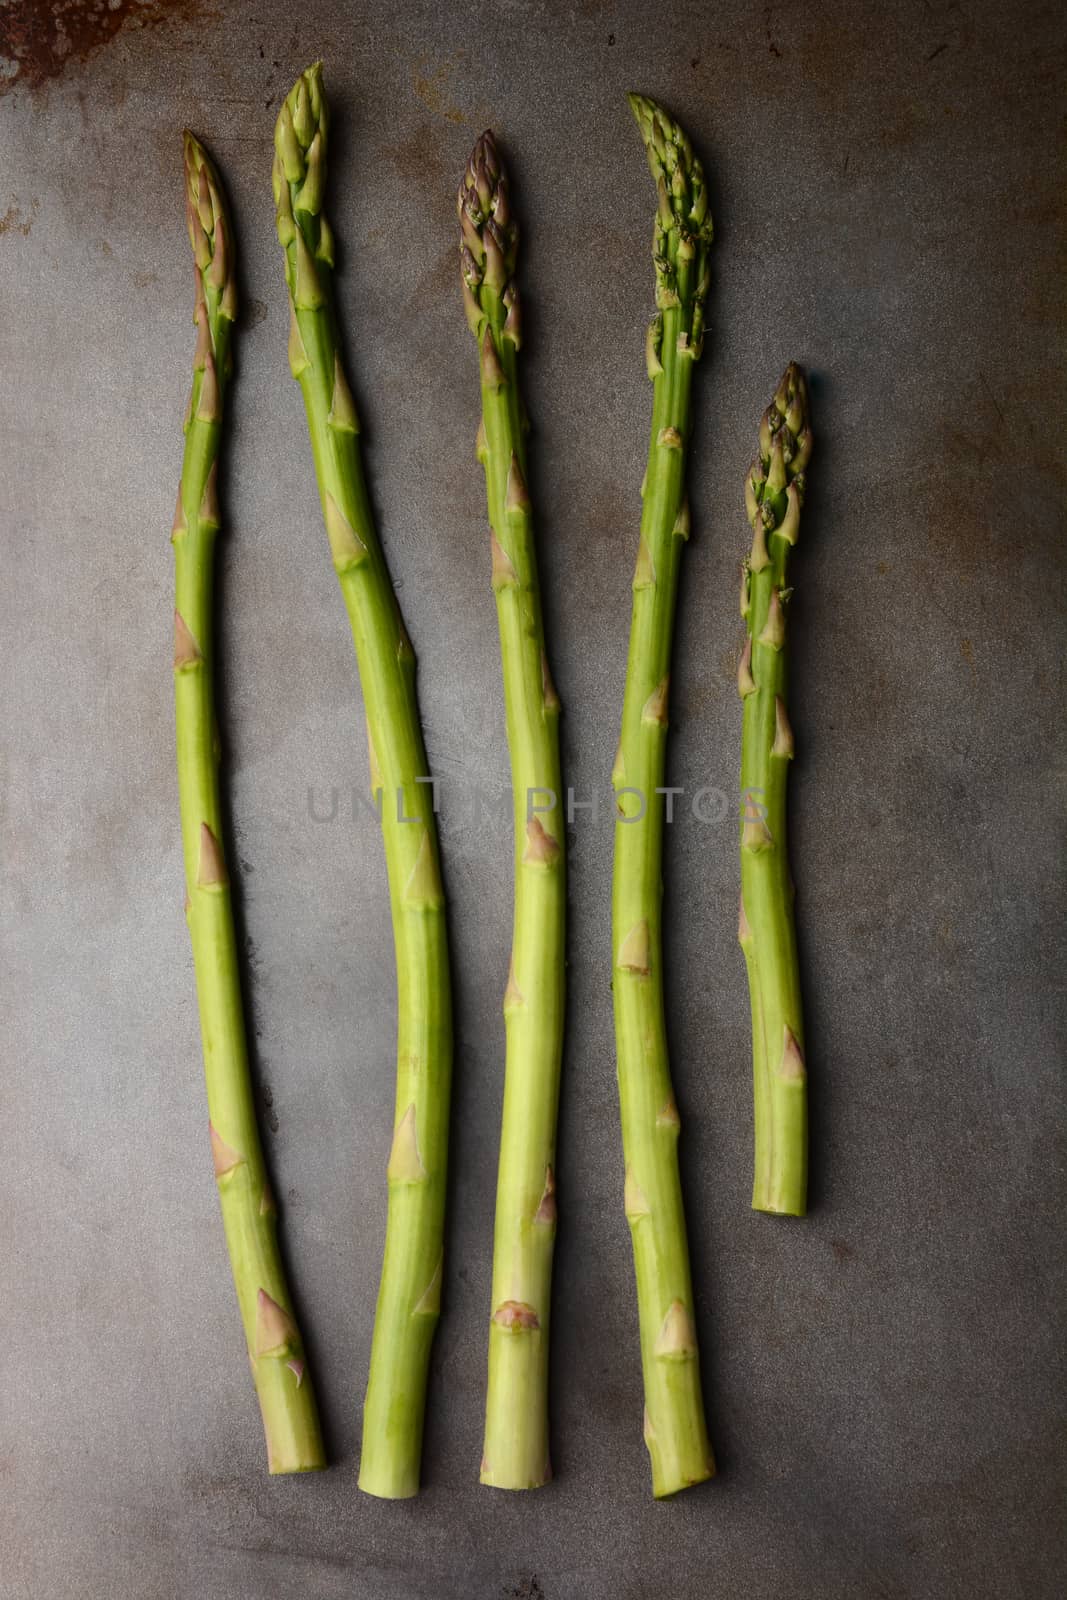 Five Asparagus Spears on a metal cooking sheet. Vertical format.